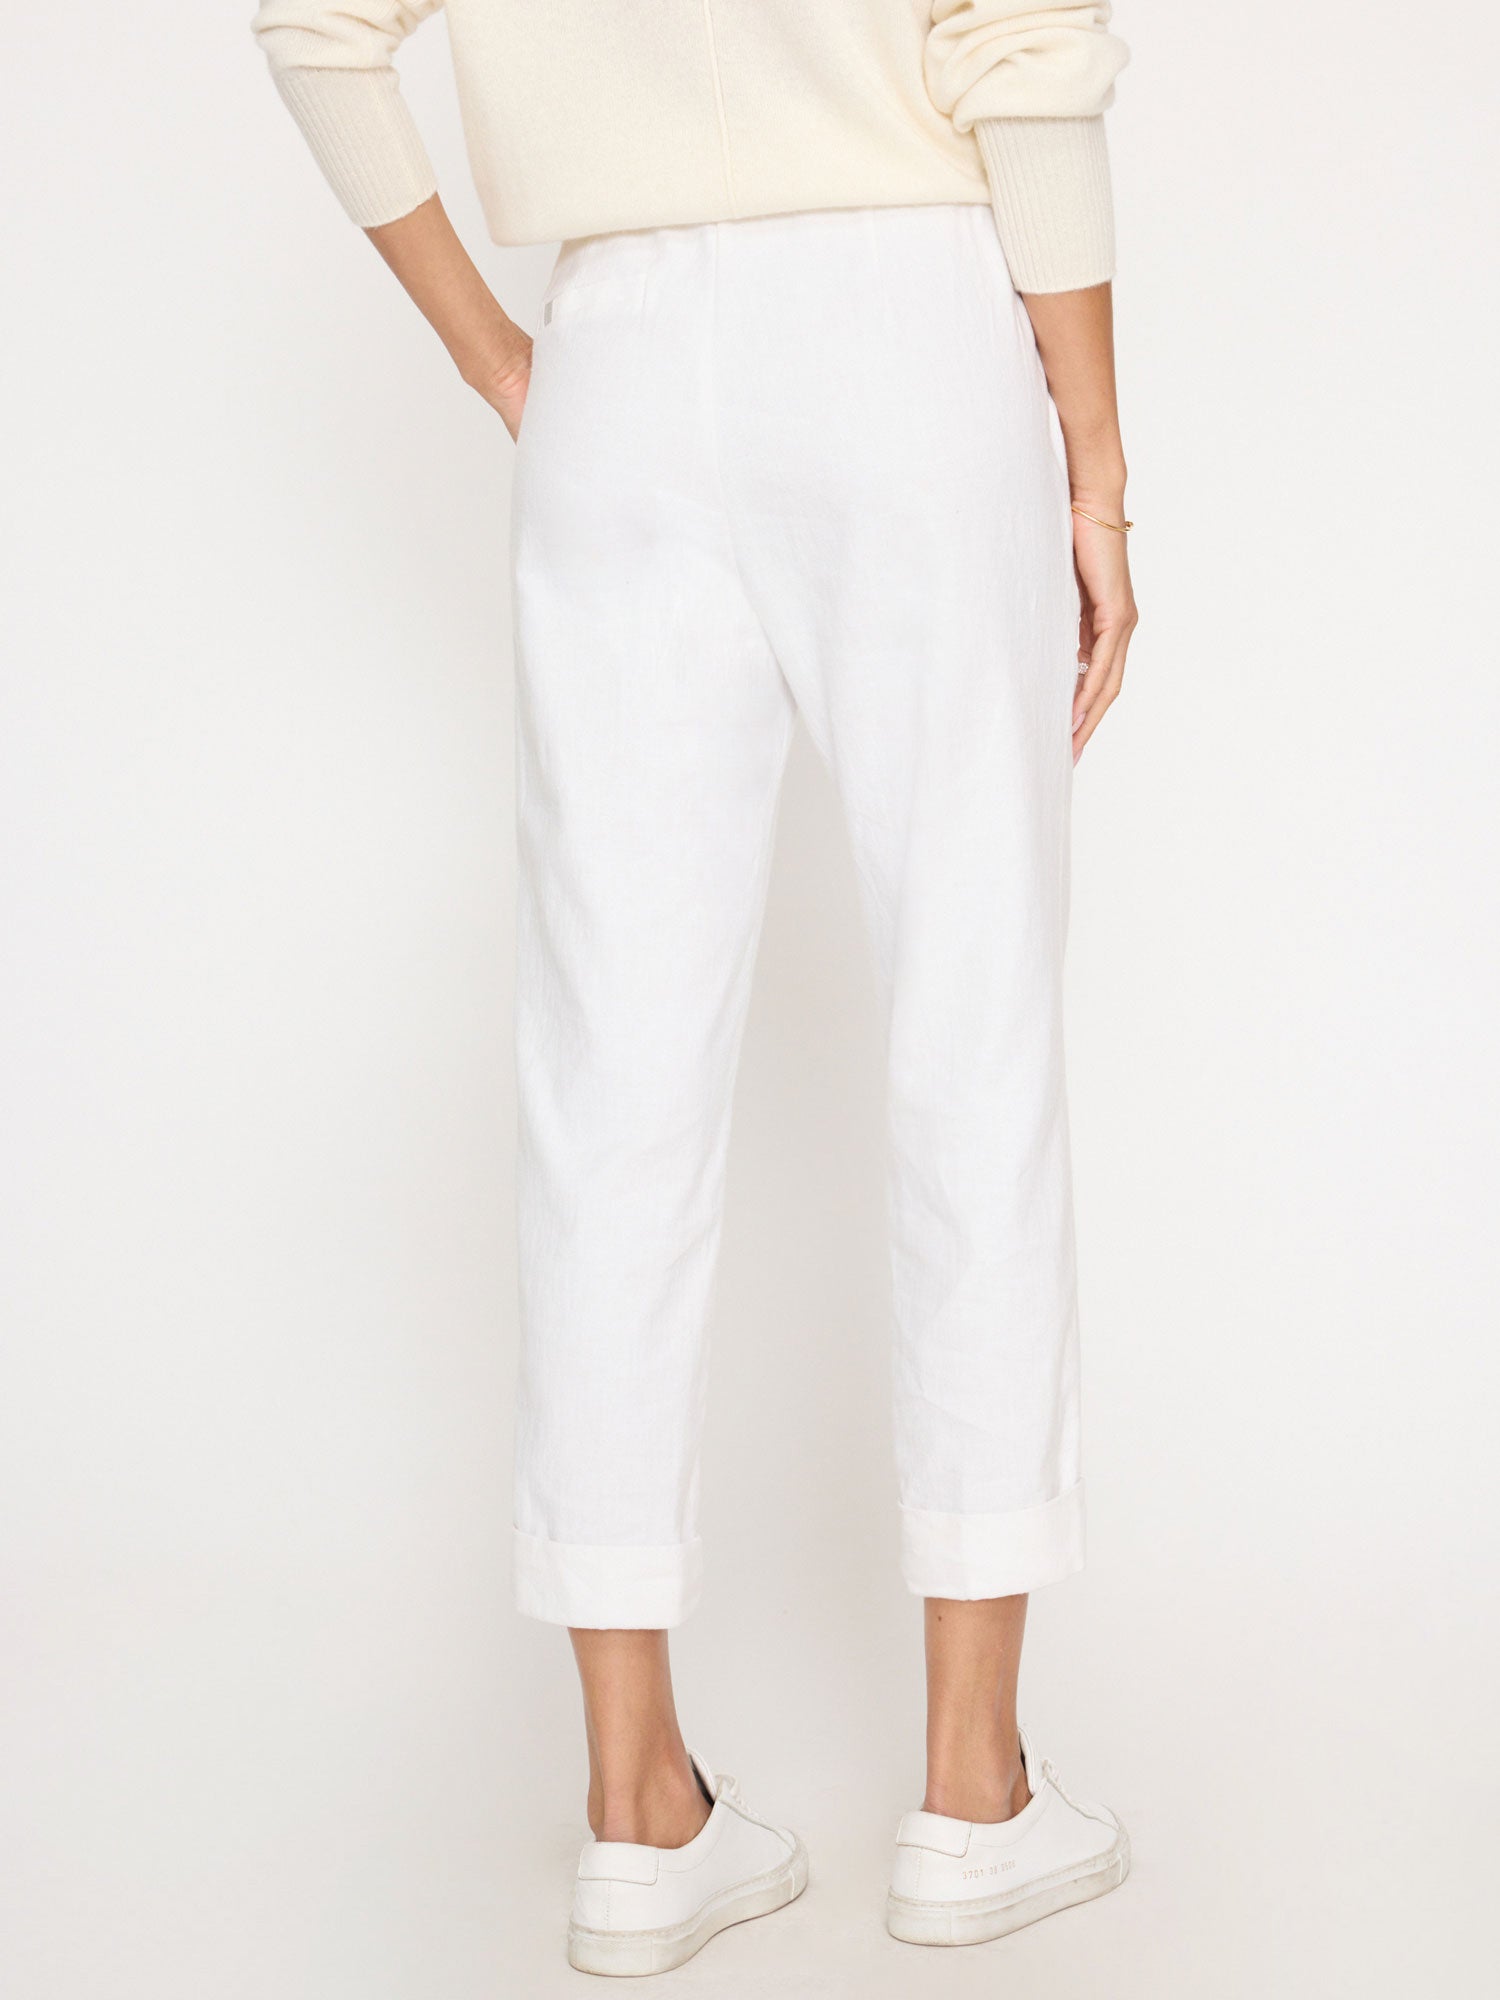 Westport white cropped pant back view